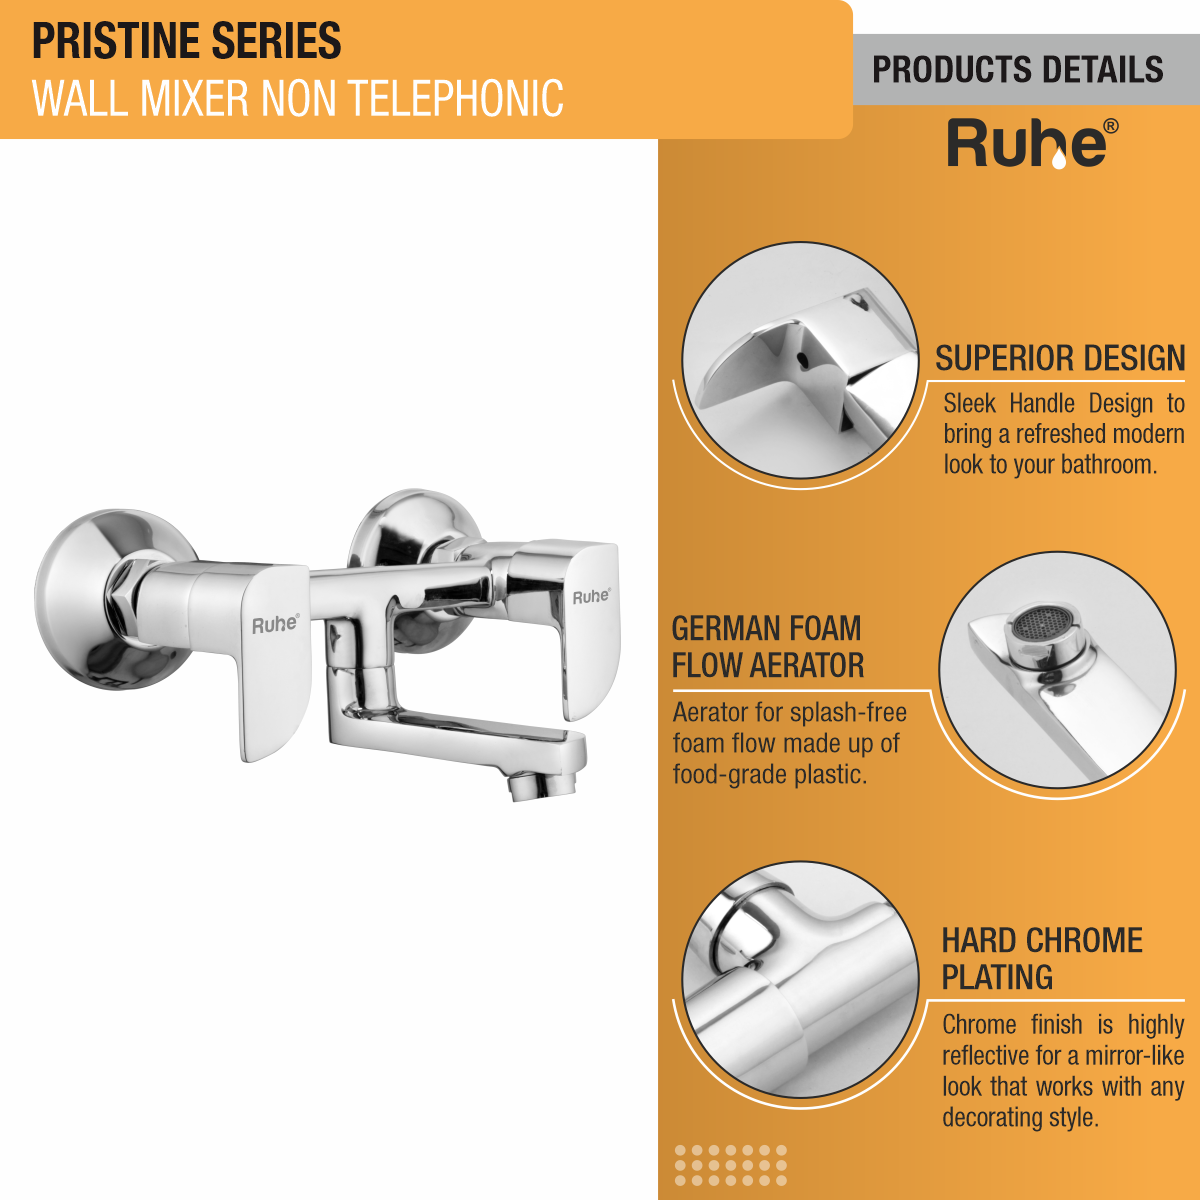 Pristine Wall Mixer Brass Faucet (Non-Telephonic) product details